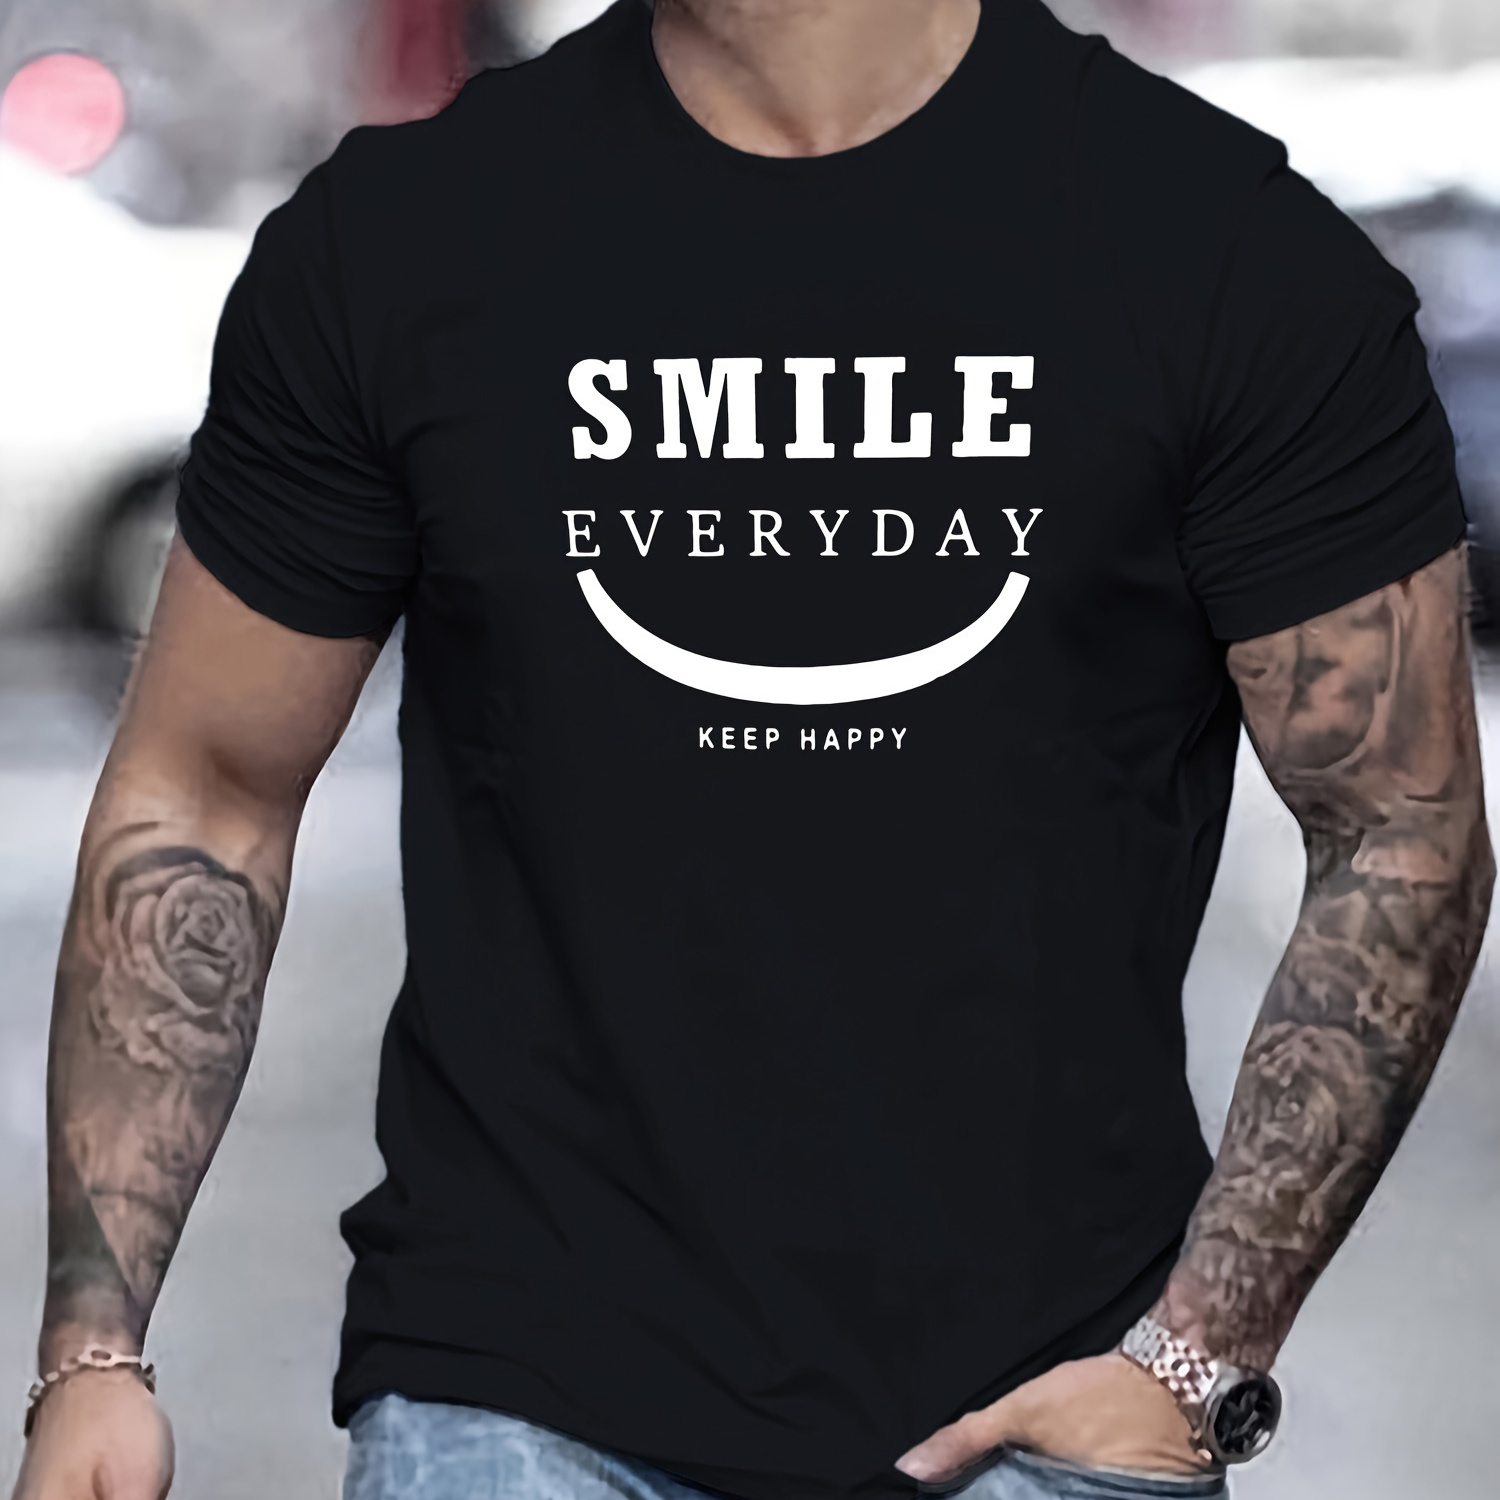 

Smile Everyday Print T Shirt, Tees For Men, Casual Short Sleeve T-shirt For Summer